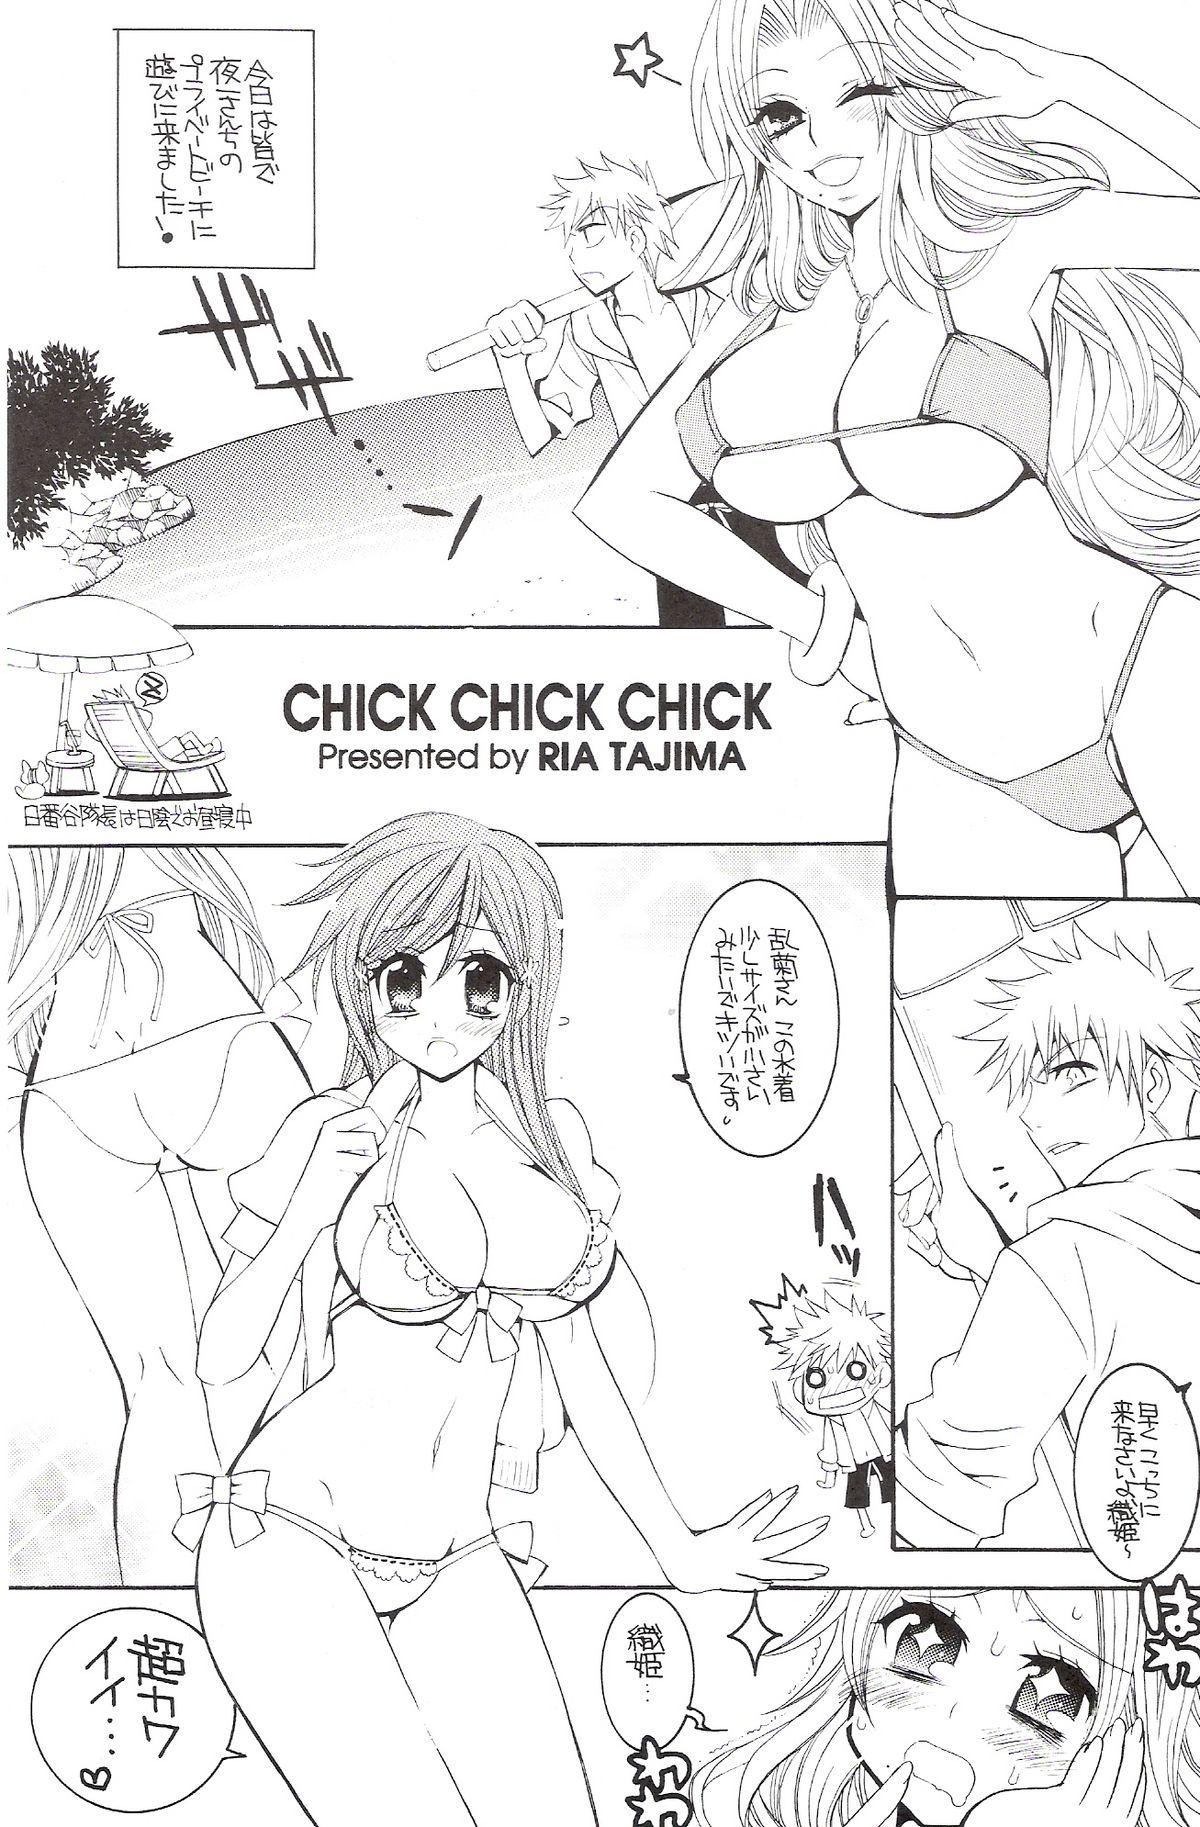 Prima CHICK CHICK CHICK - Bleach Sex Toy - Page 4